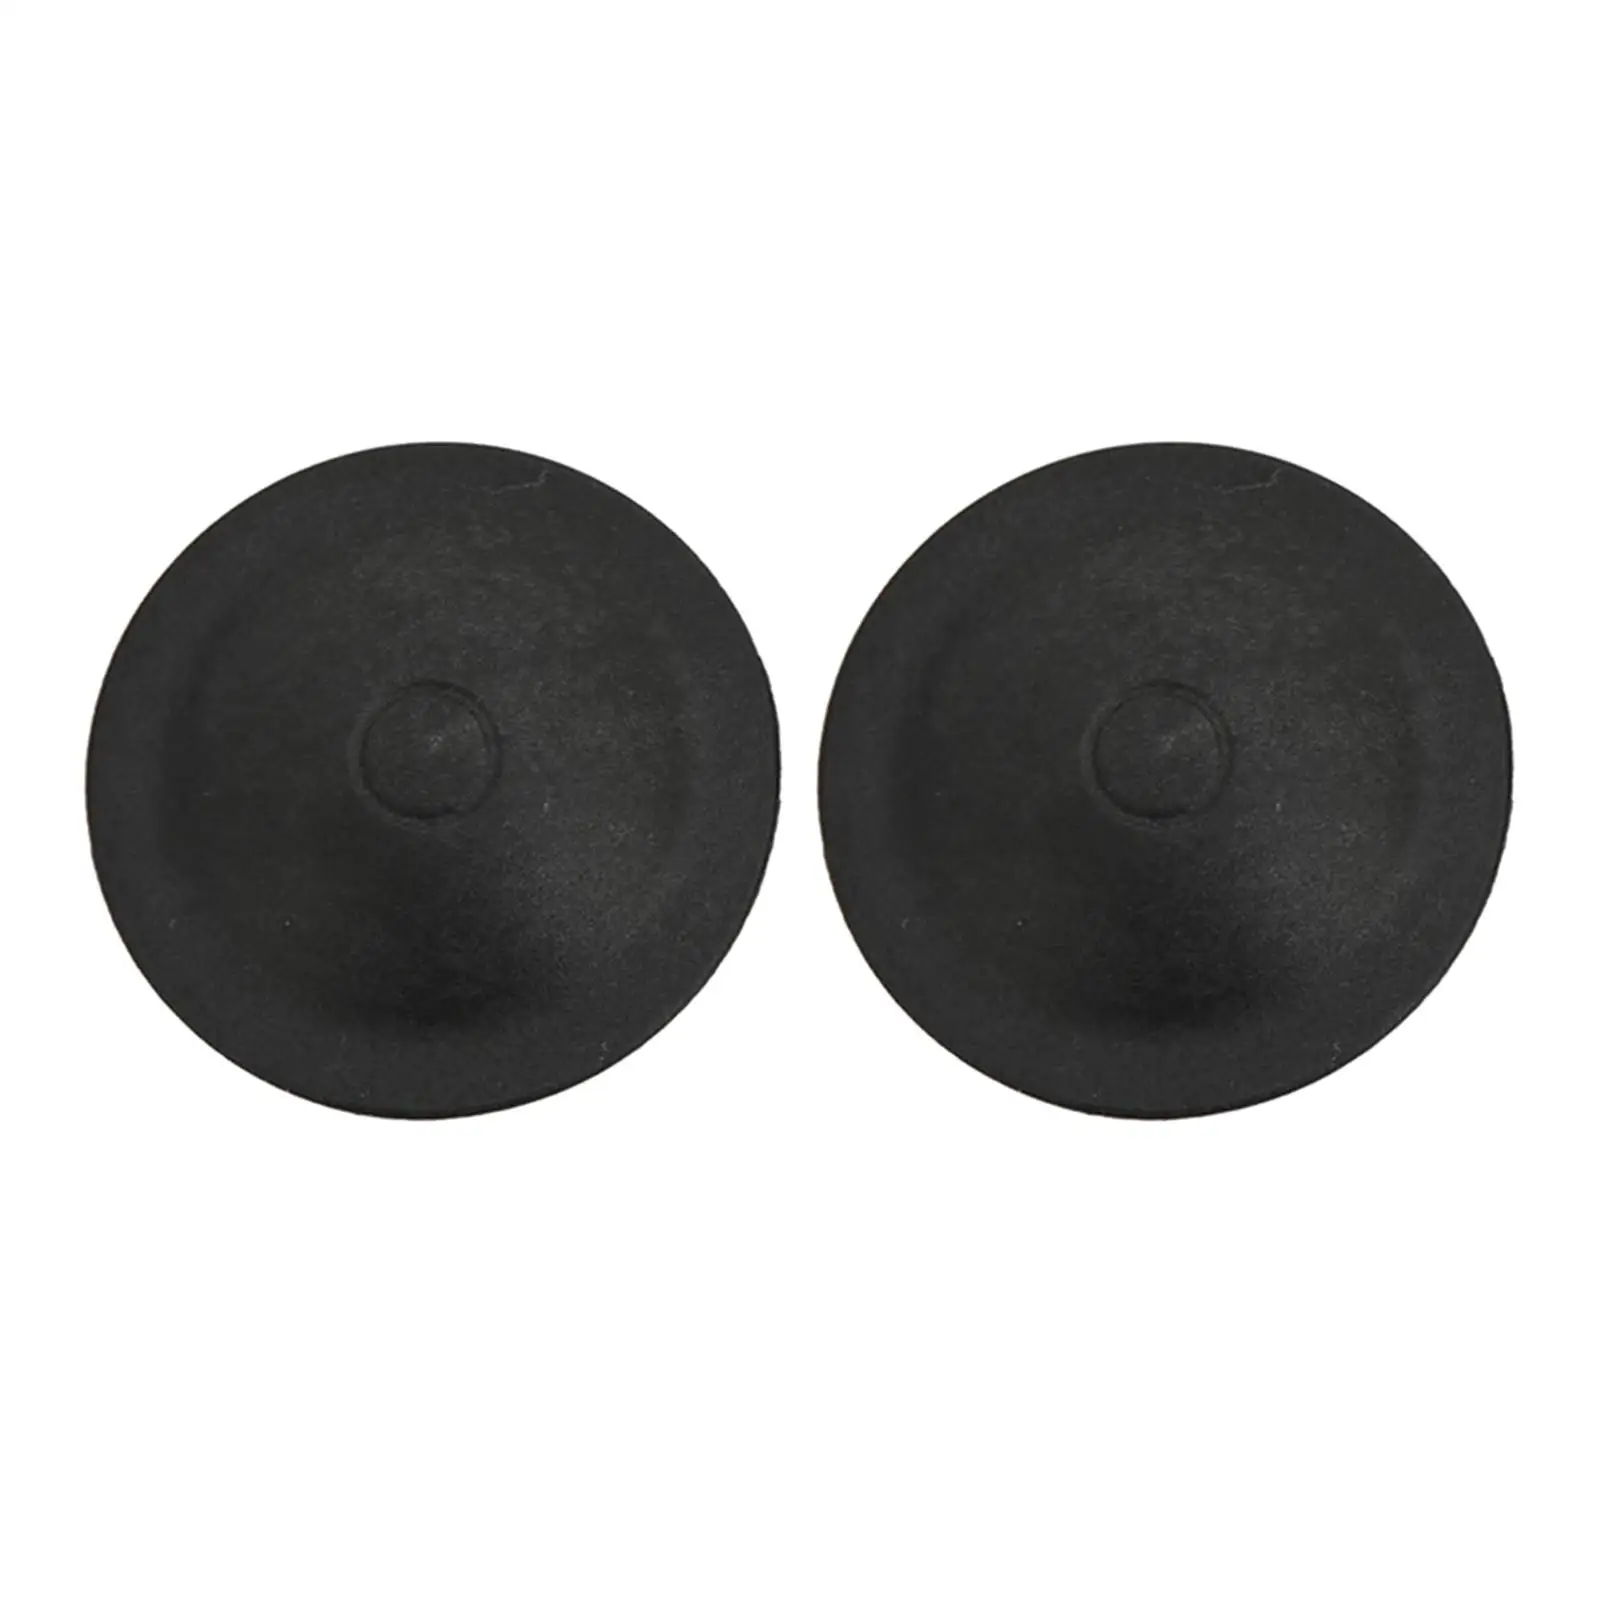 2x Top Shock Absorber Mount Cover Caps 51938656 Shock Absorption Protection Protector Sound Insulation Parts for 